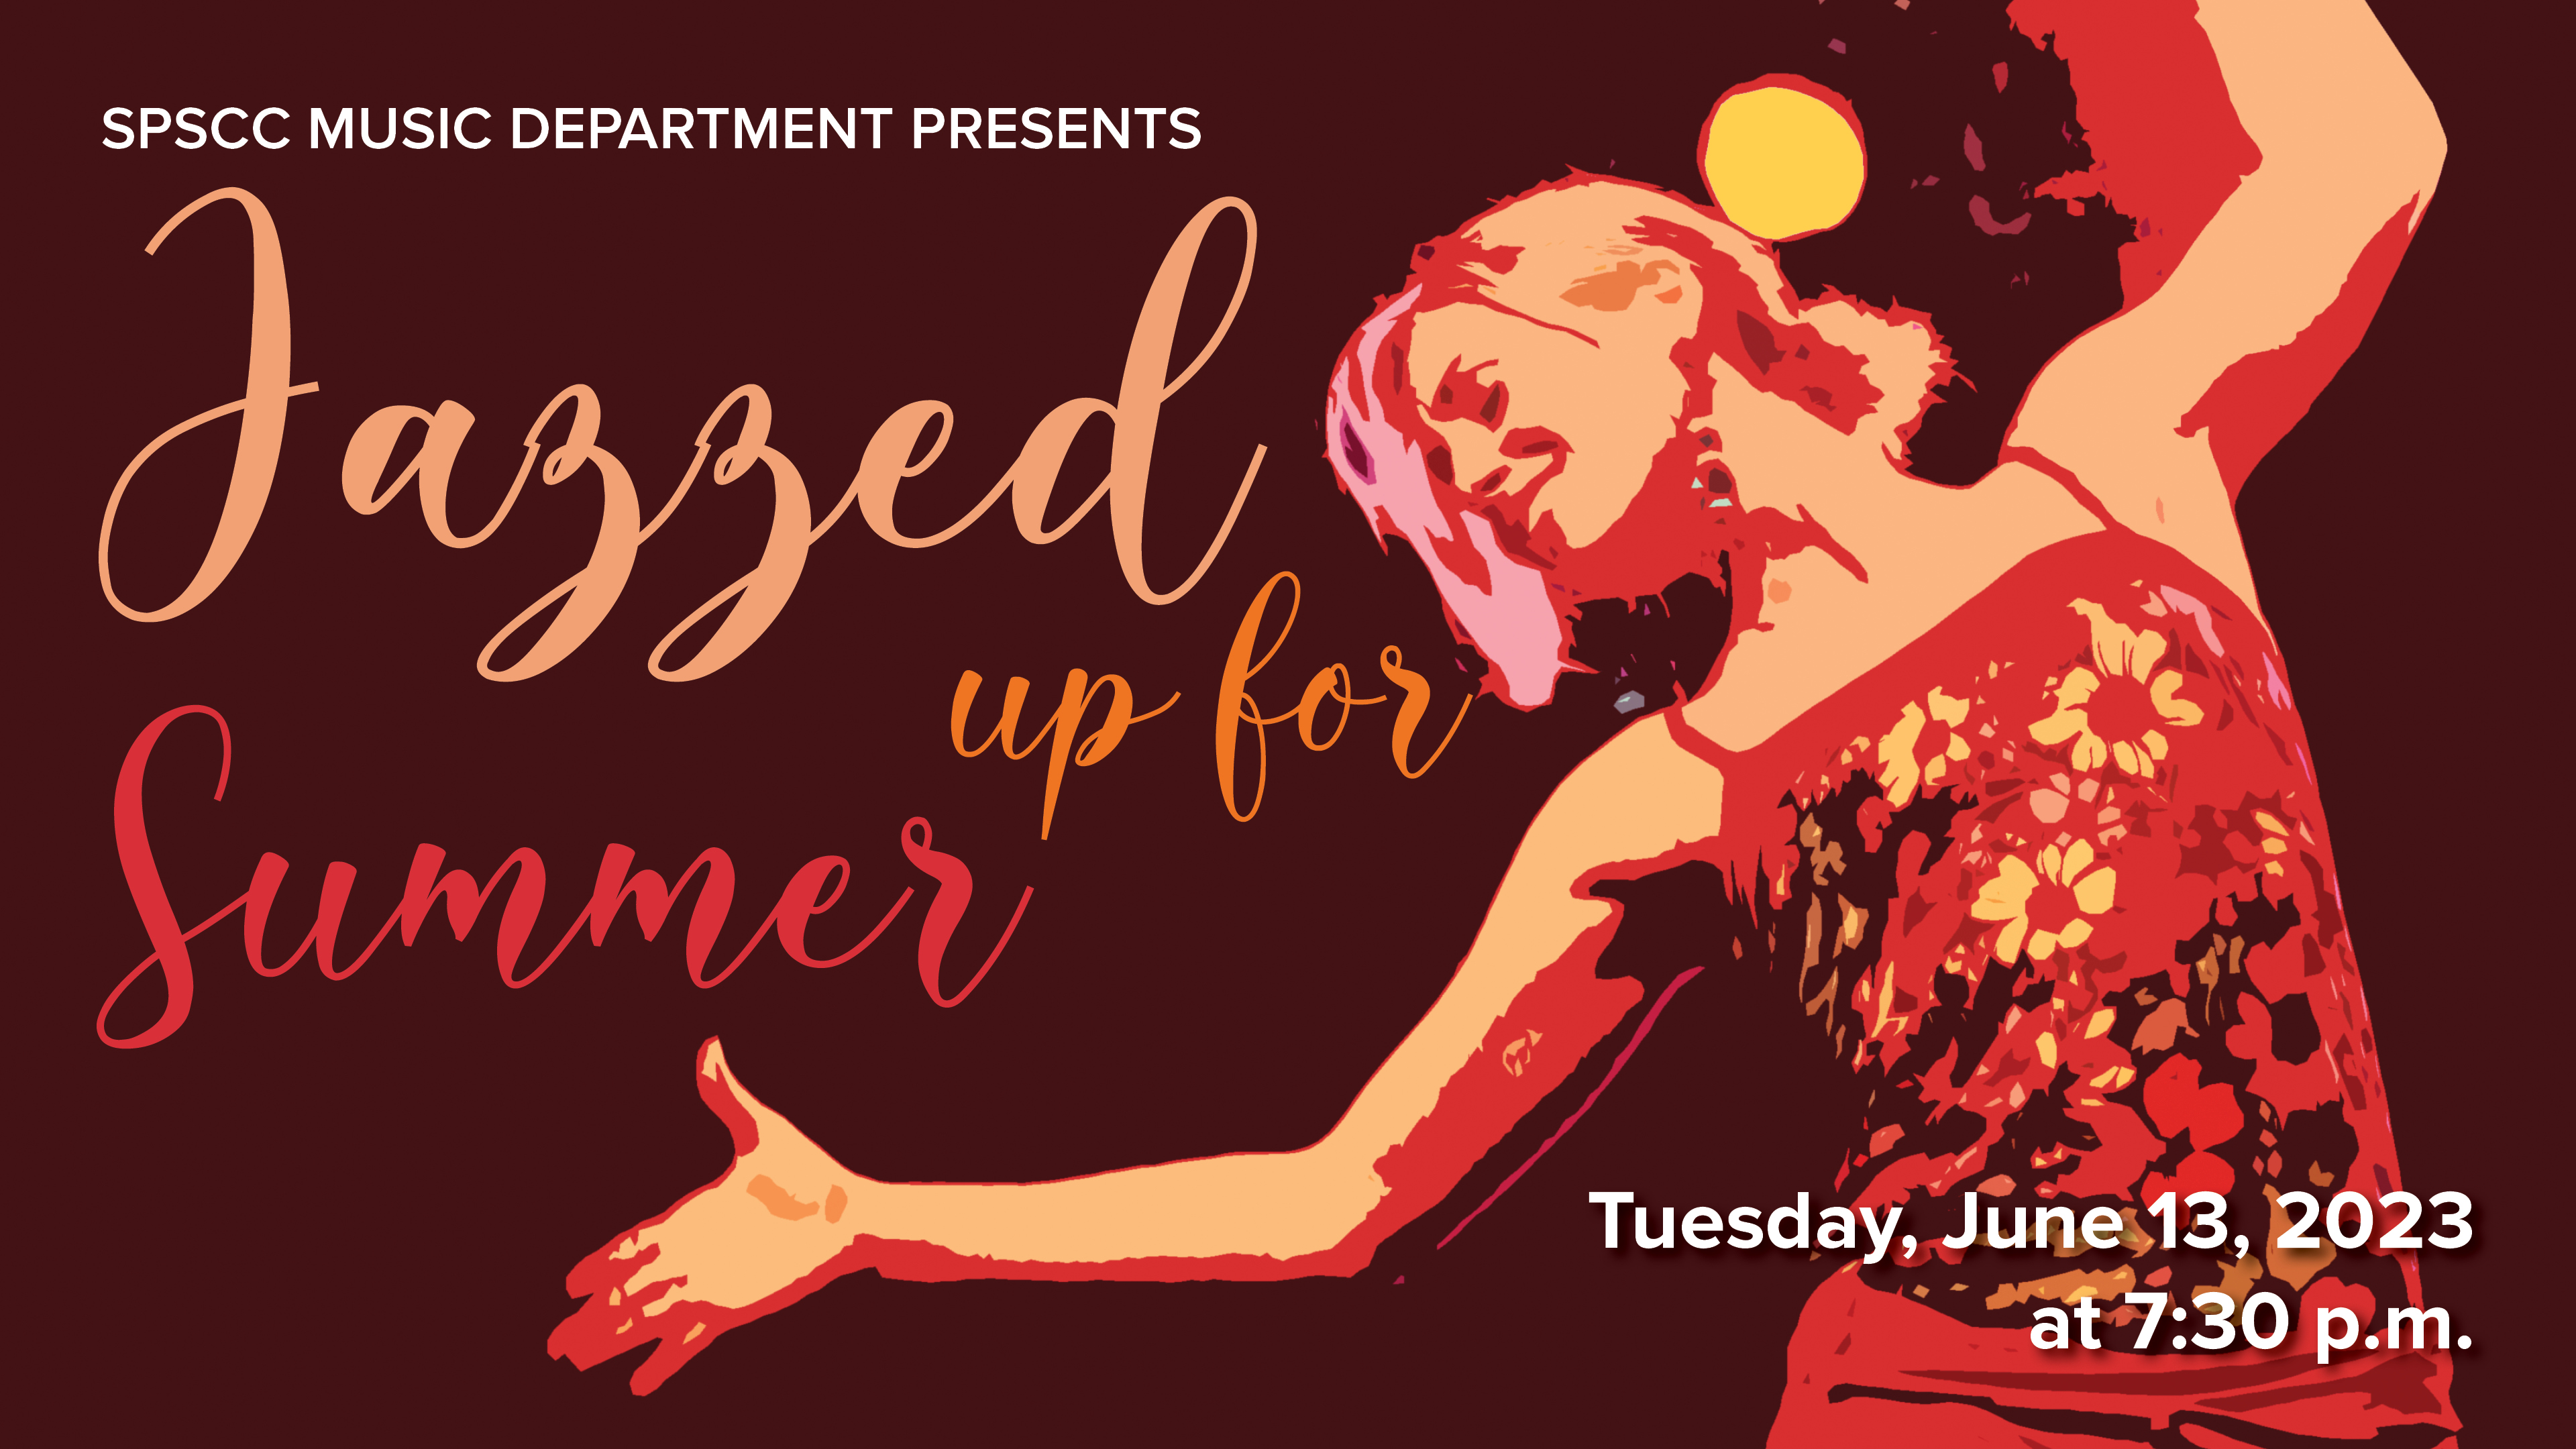 SPSCC Music Department presents "Jazzed Up for Summer" on Tuesday, June 13, 2023 at 7:30 p.m.